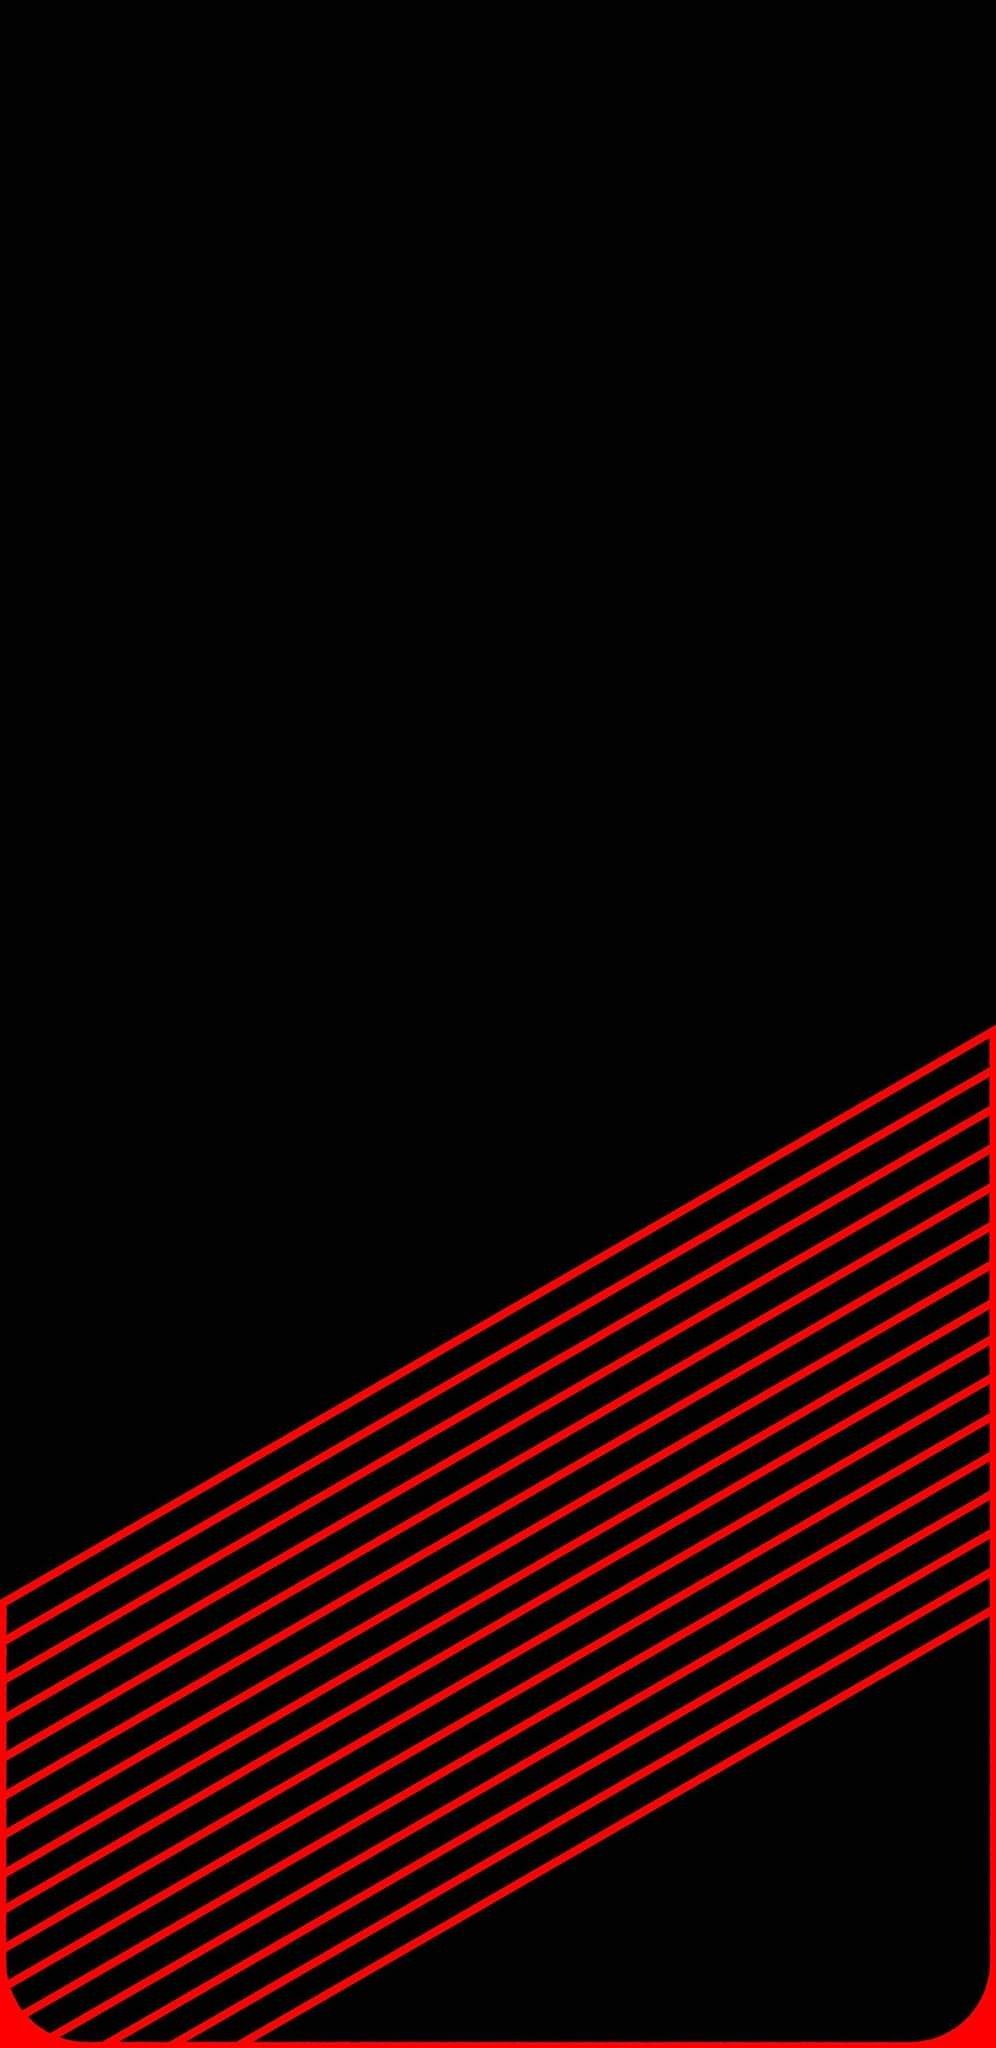 Black and Red Line Wallpaper Free Black and Red Line Background